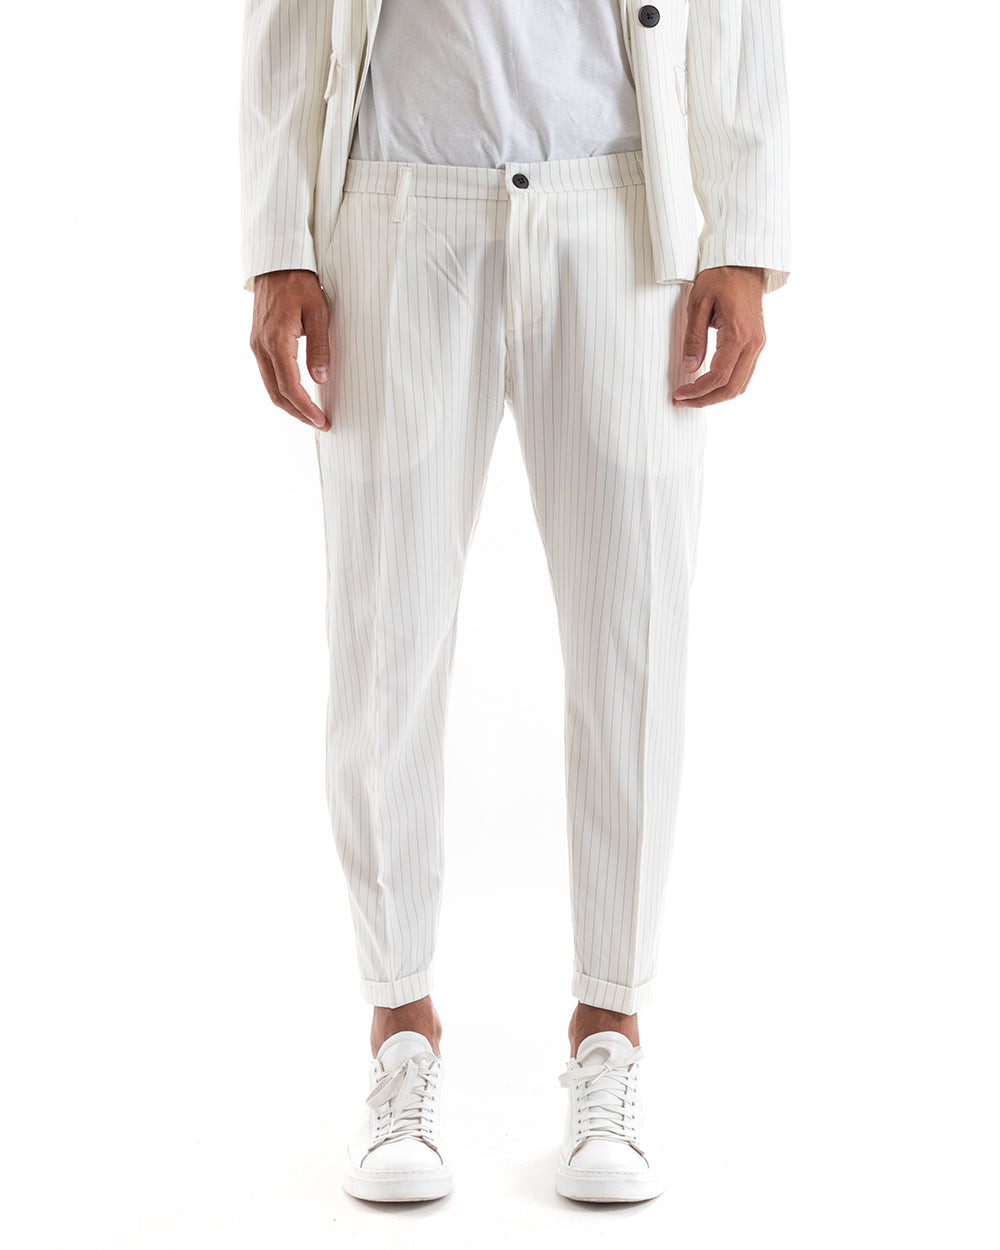 Double-breasted Men's Suit Viscose Suit Jacket Trousers White Pinstripe Striped Elegant Ceremony GIOSAL-OU2139A